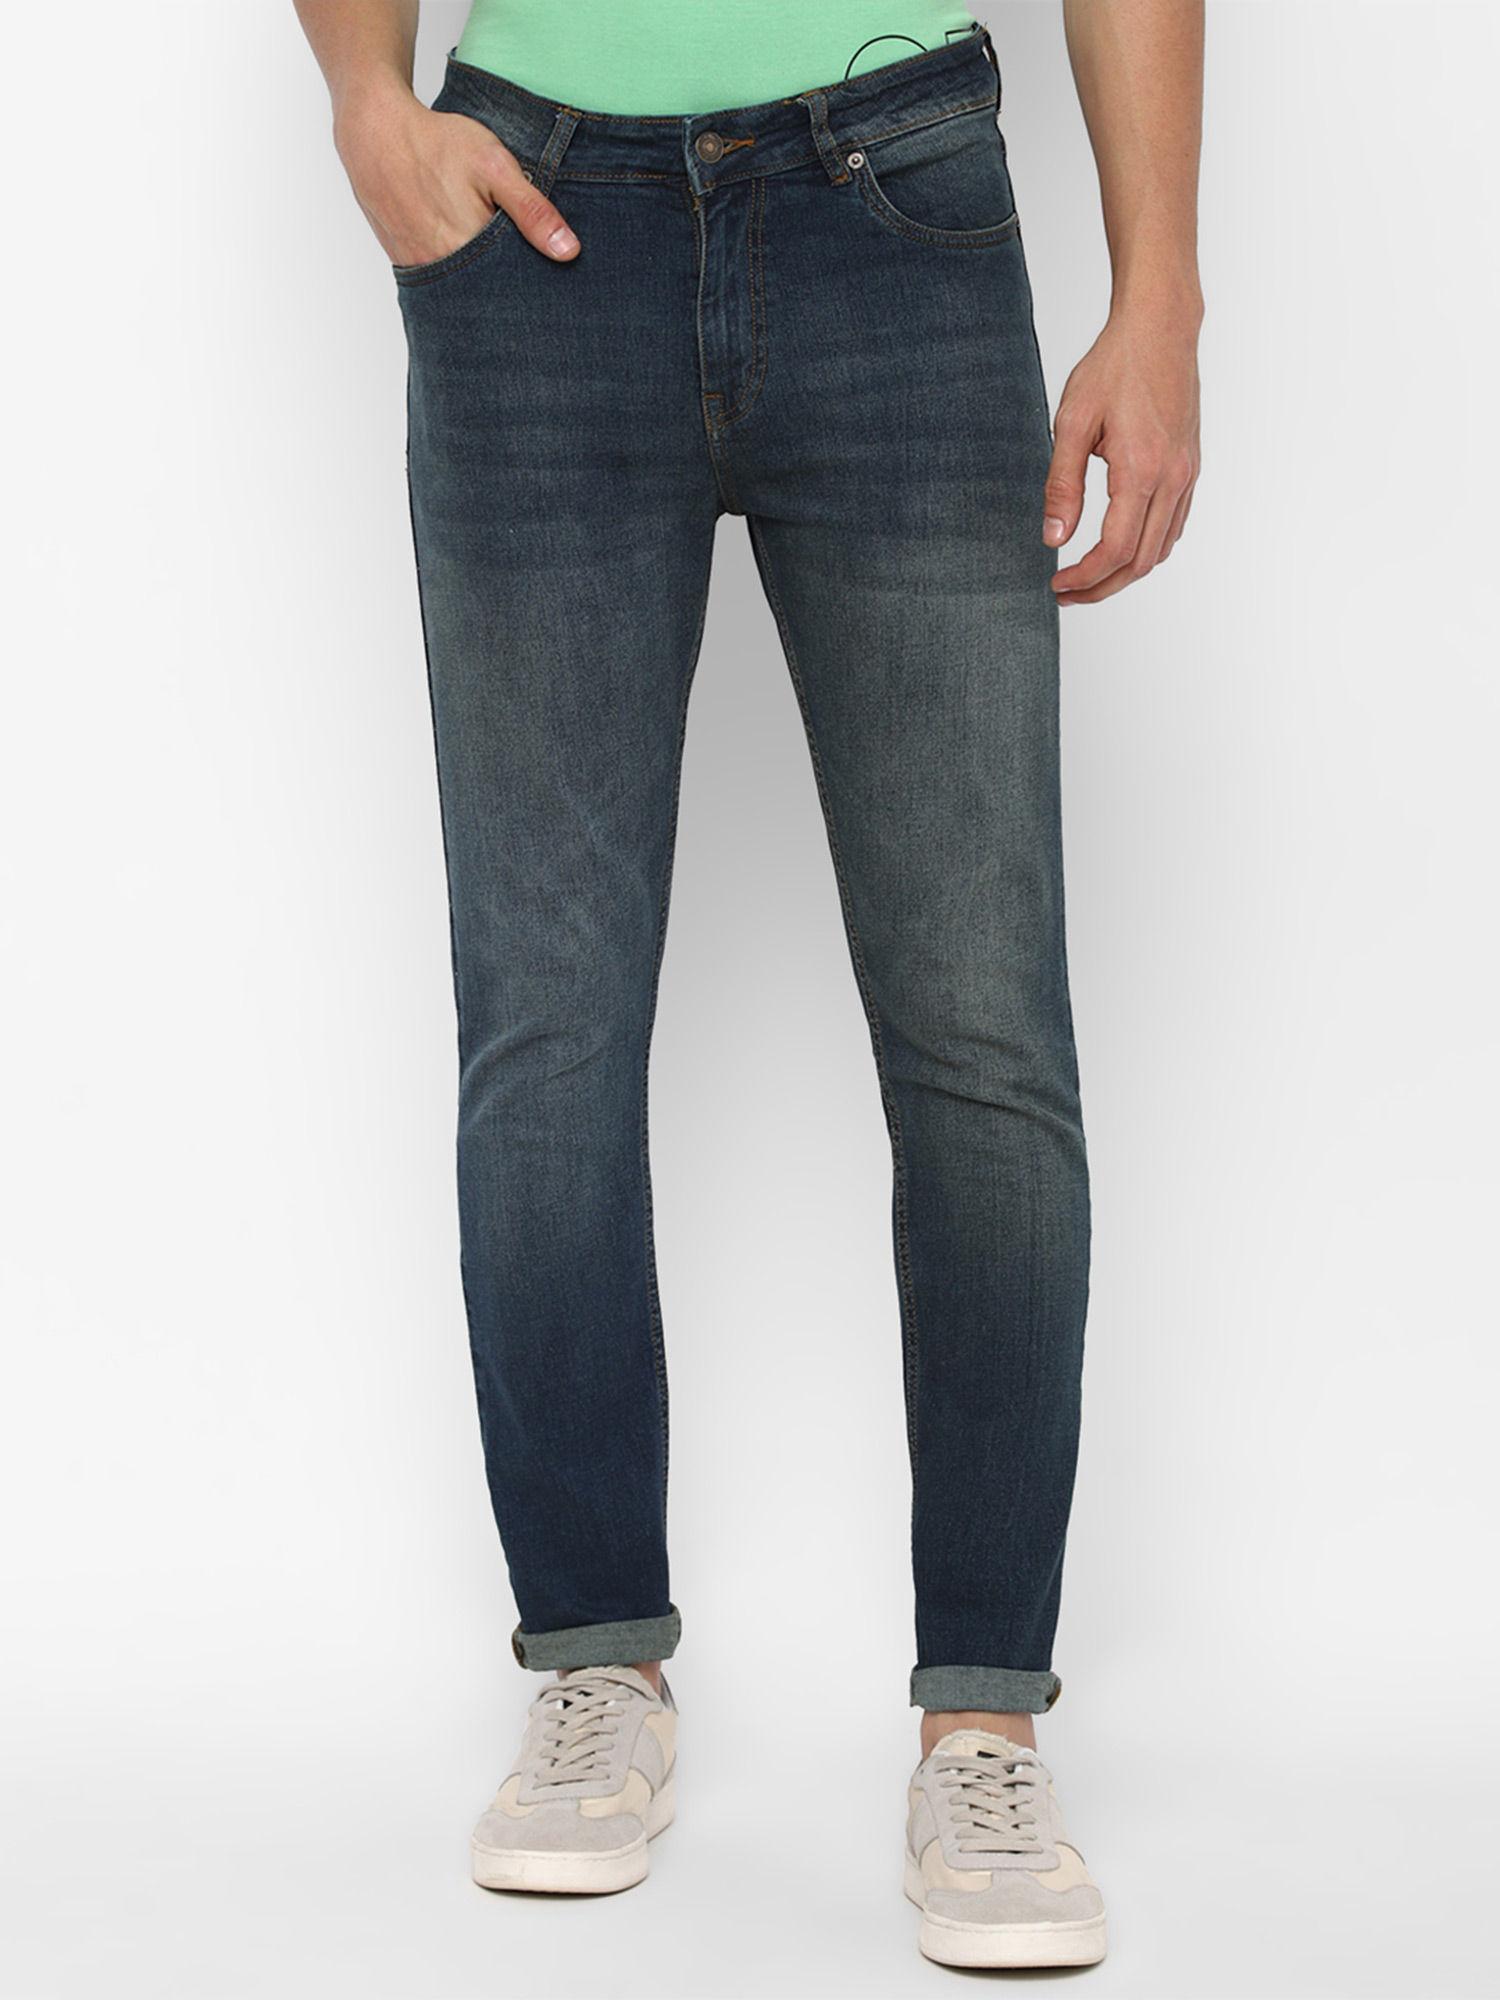 solid mid-rise jeans